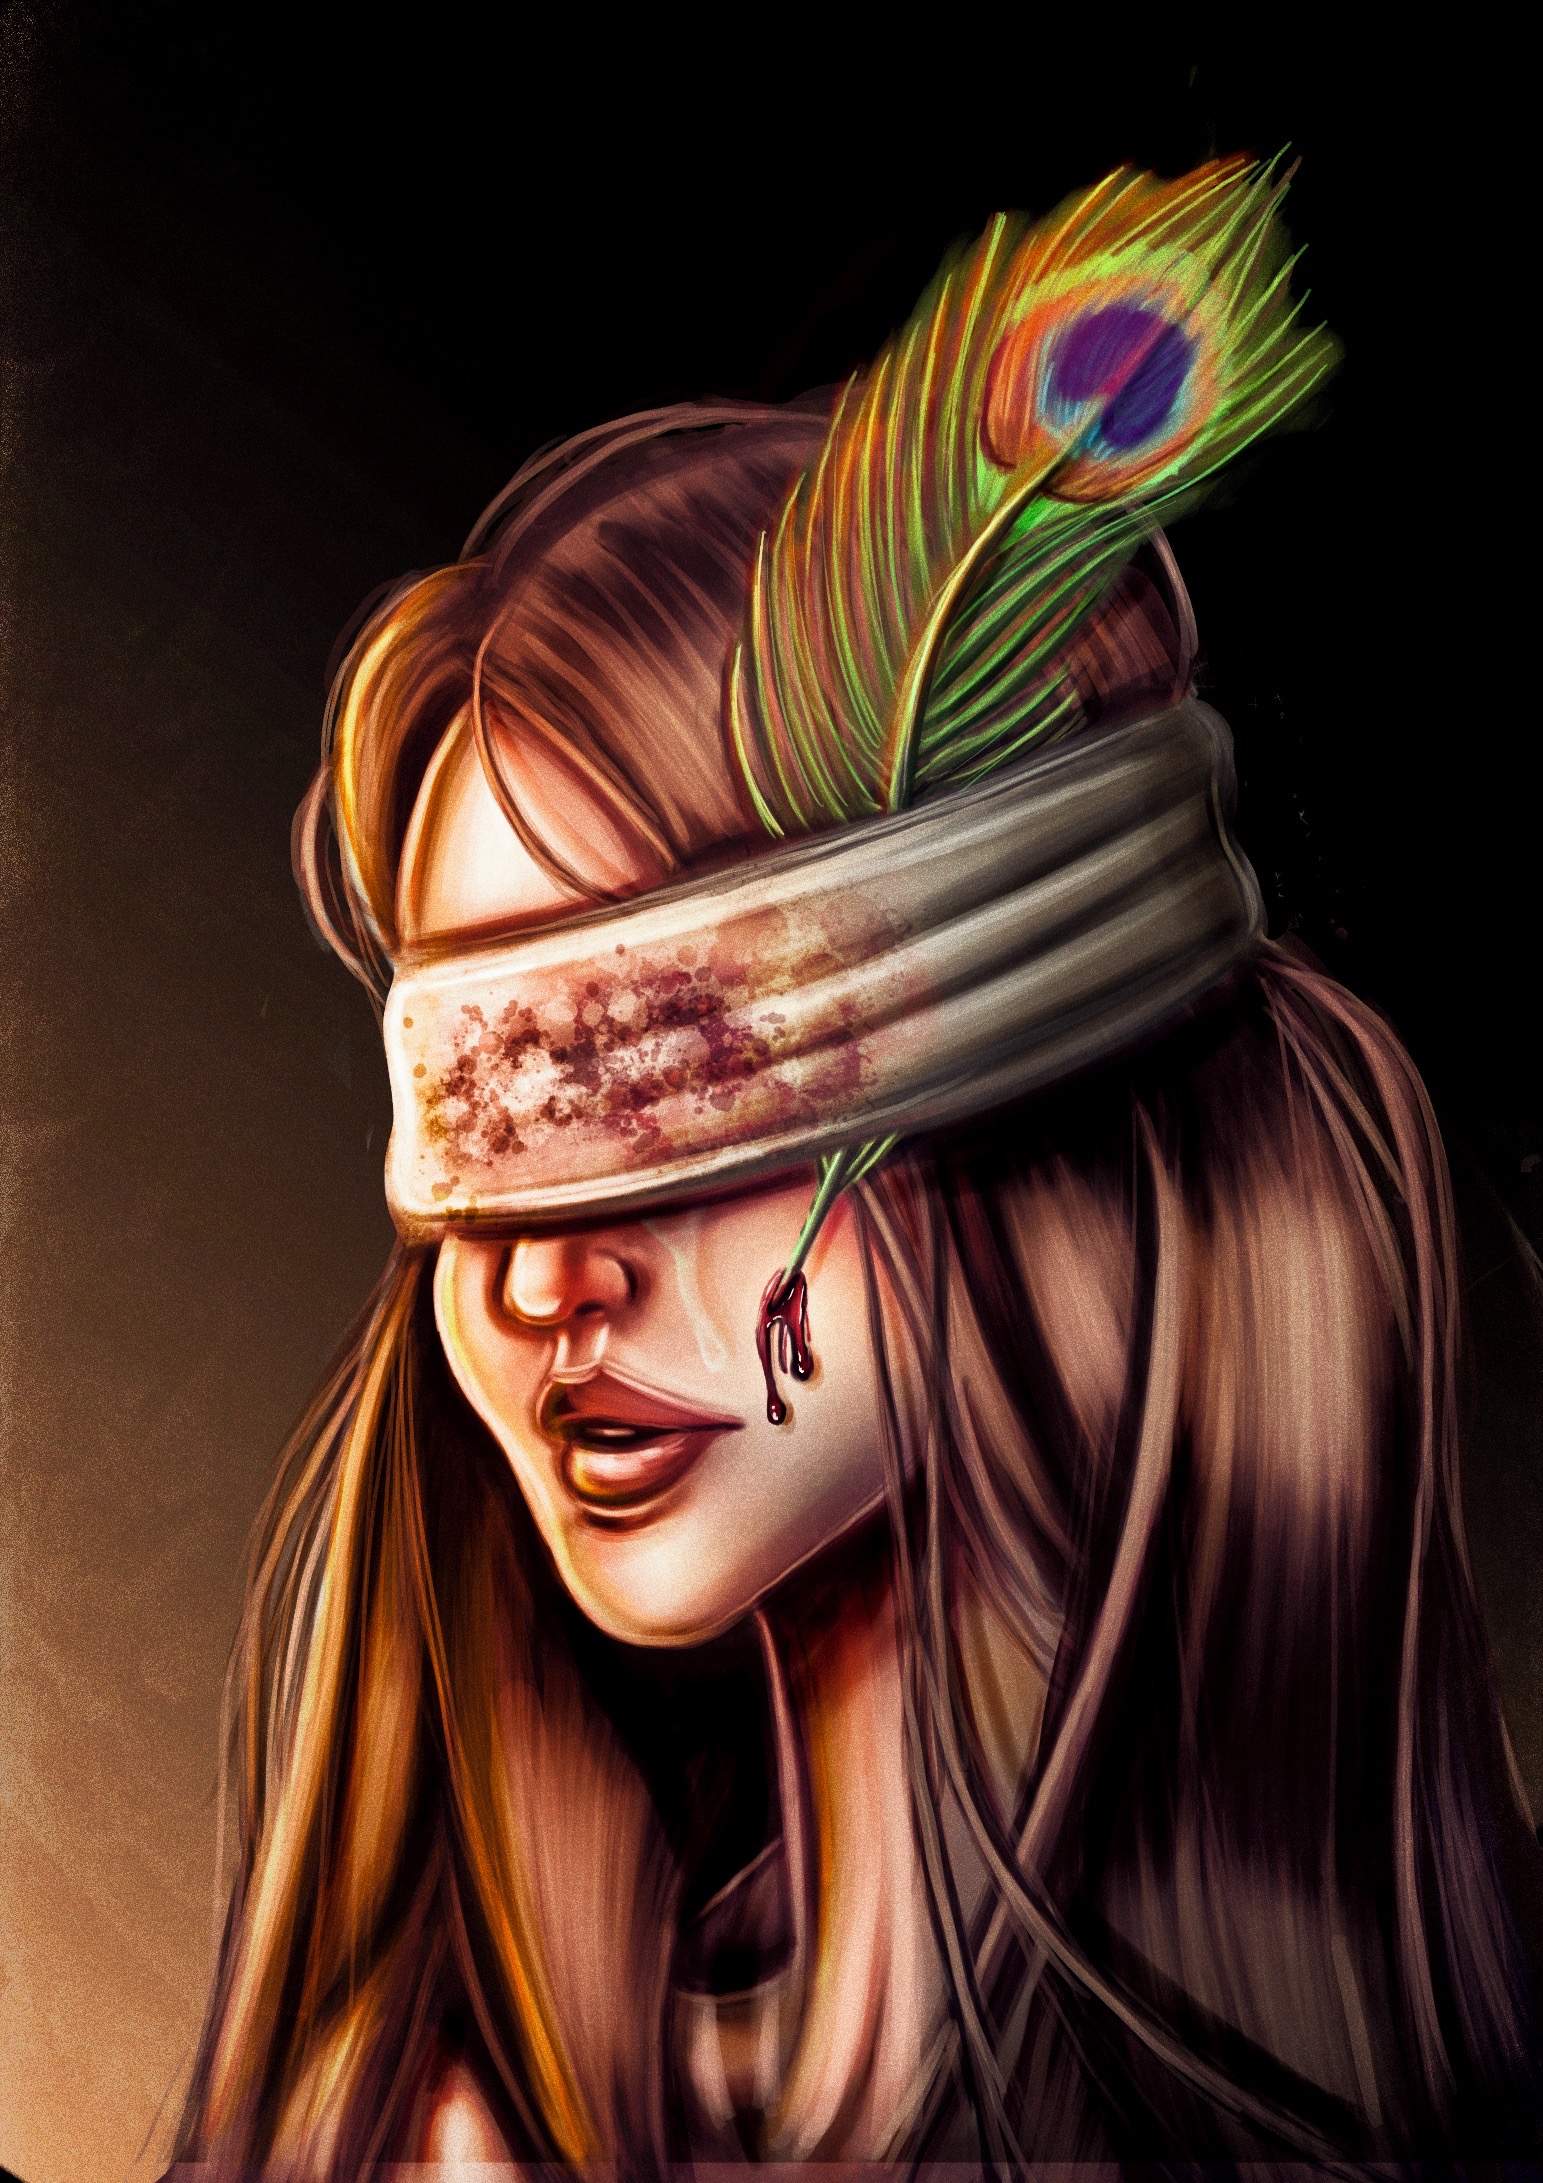 A digital portrait of a young woman. Her hair is a tangled mess while a bloodied blindfold hides her eyes. A lone peacock feather lays underneath, piercing her cheek enough to cause a drop of blood to form.